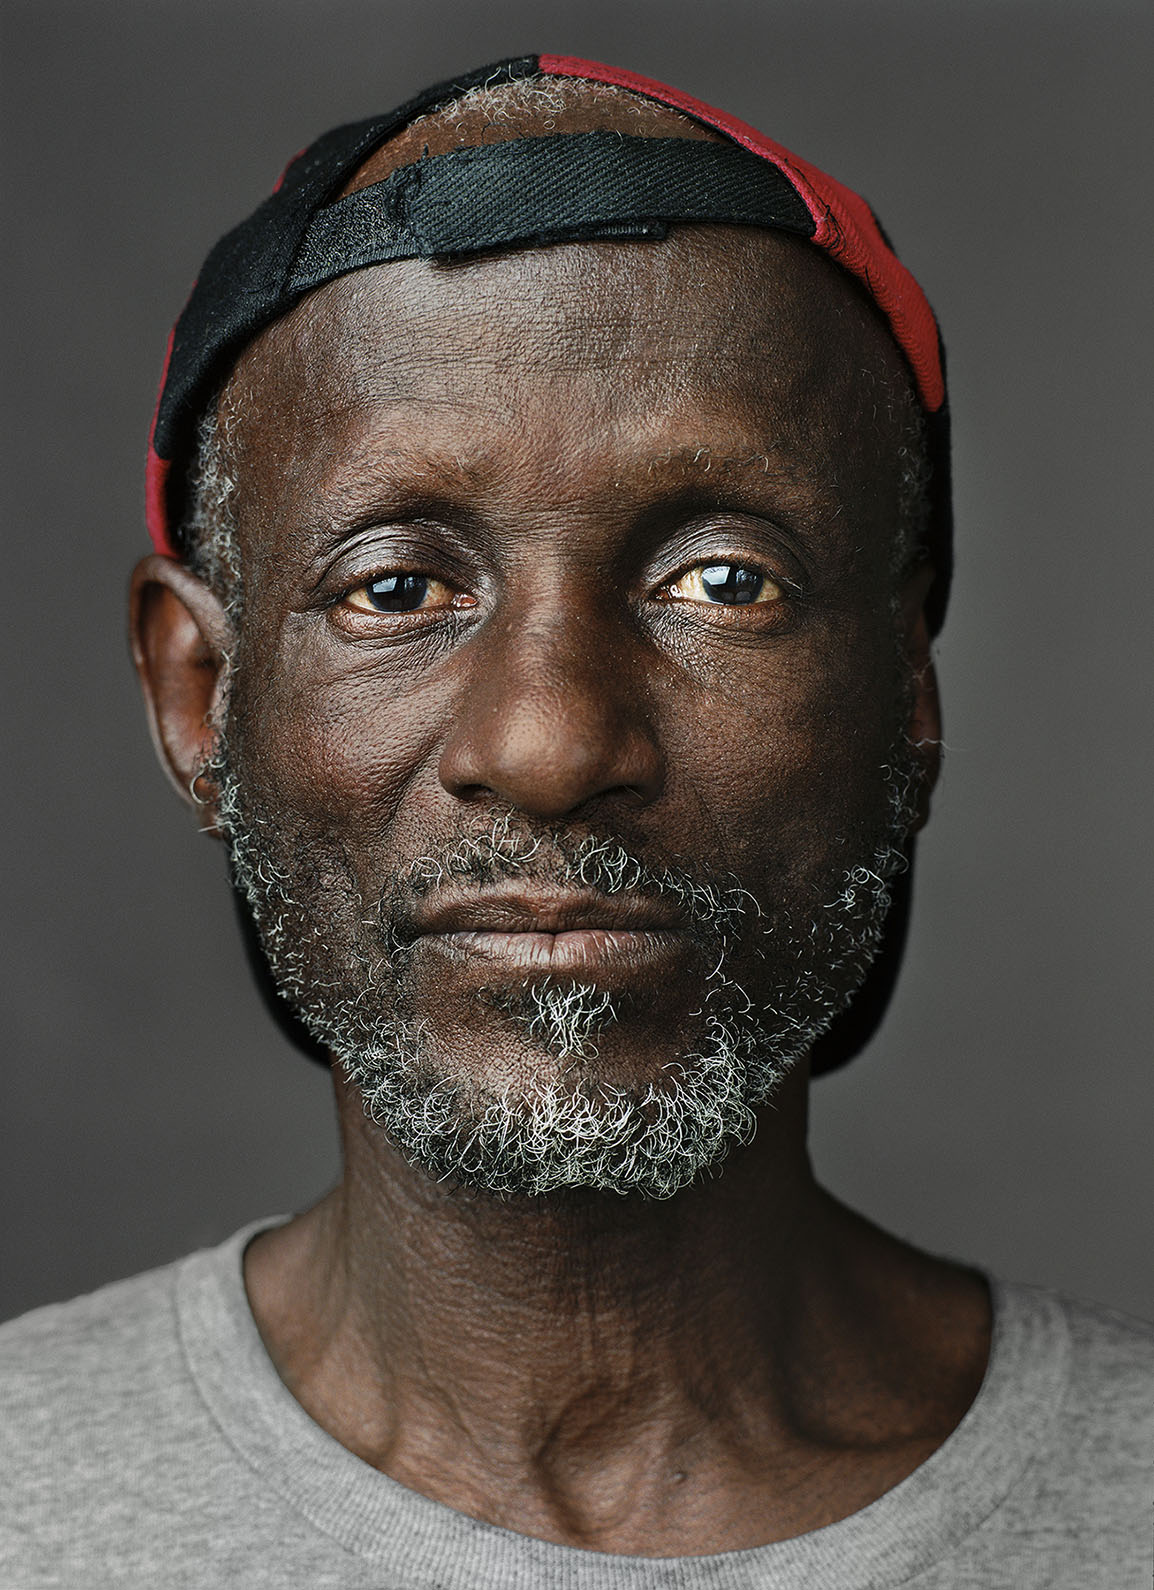 USA. "Down and Out in the South": Studio portraits of homeless people in Atlanta (GA), Columbia (SC) and the Mississippi Delta.  Johnny (b. Nashville, GA, 1955), photographed in Atlanta, GA. June 2011.